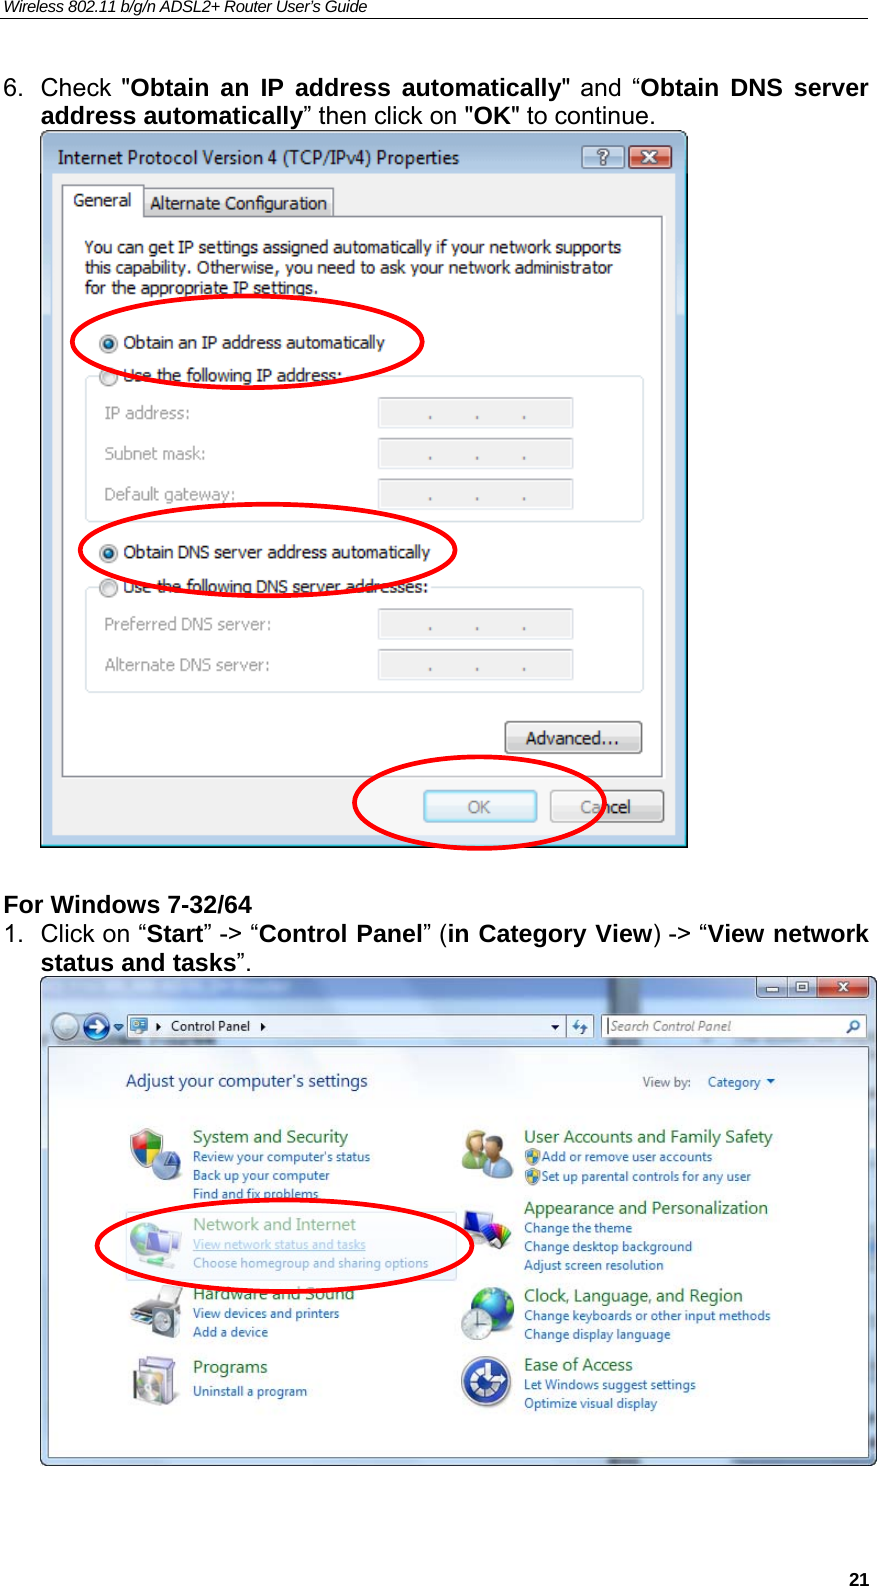 Wireless 802.11 b/g/n ADSL2+ Router User’s Guide    6. Check &quot;Obtain an IP address automatically&quot; and “Obtain DNS server address automatically” then click on &quot;OK&quot; to continue.   For Windows 7-32/64 1.  Click on “Start” -&gt; “Control Panel” (in Category View) -&gt; “View network status and tasks”.    21